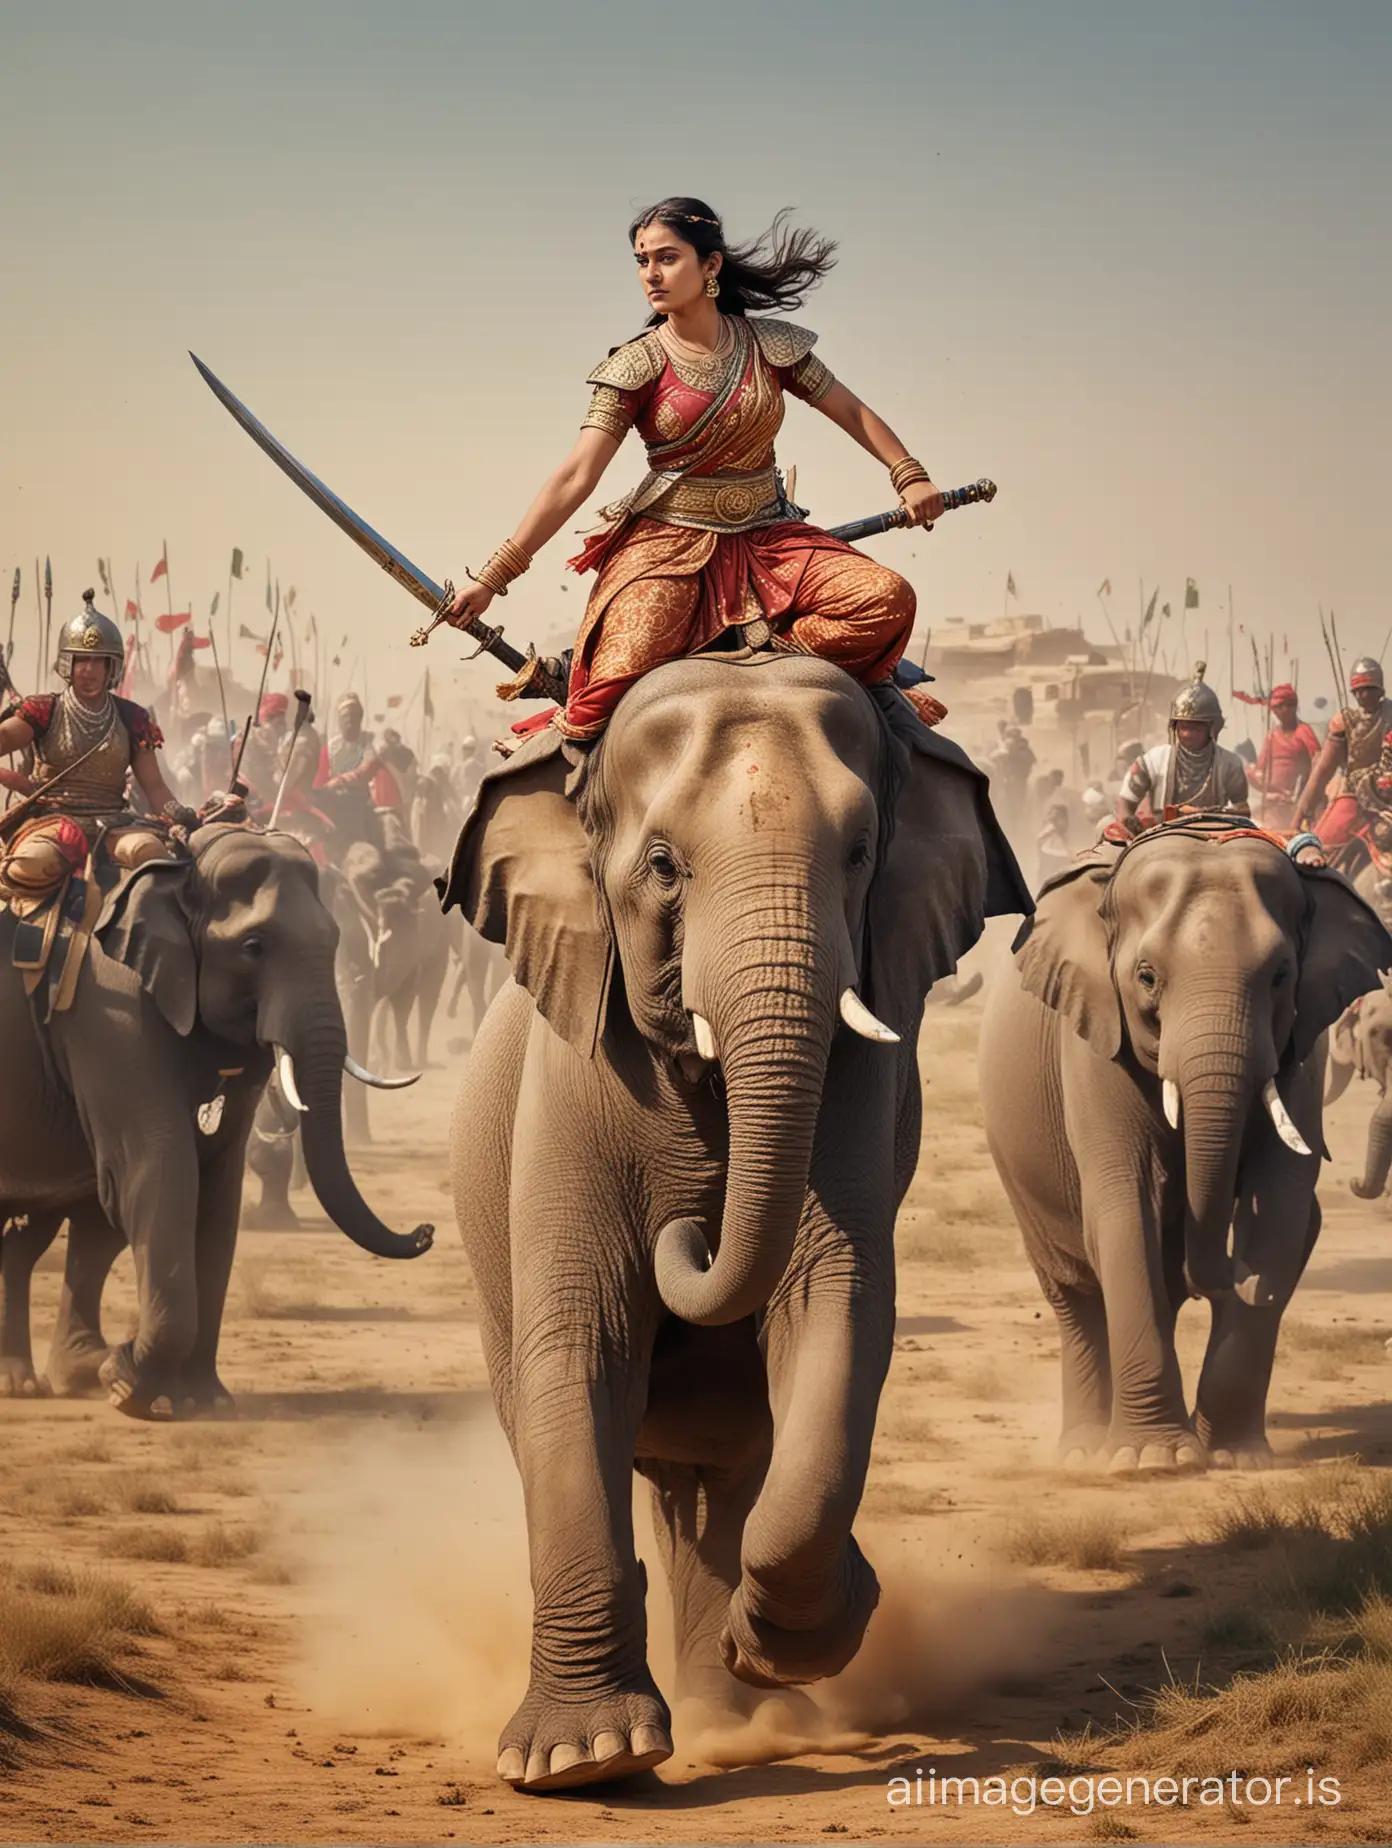 Female warrior seated on elephant with sword and javelin and elephant is attacking on large Mughal army in battle field. Background is dangerous and war going.